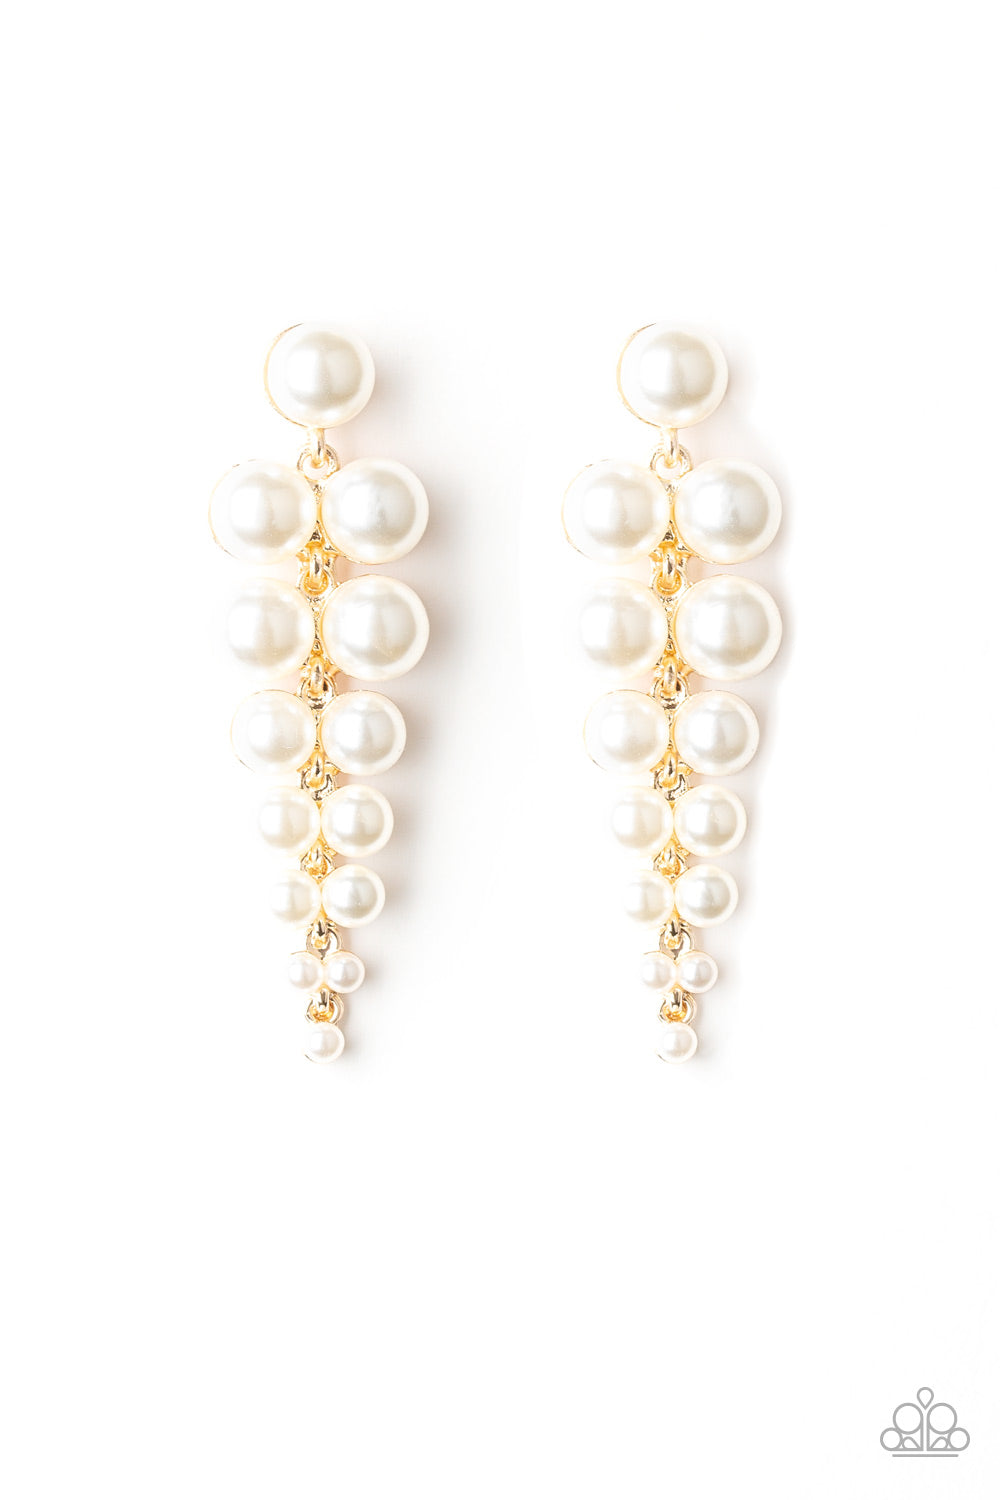 Totally Tribeca - Gold Earrings - Paparazzi Accessories 